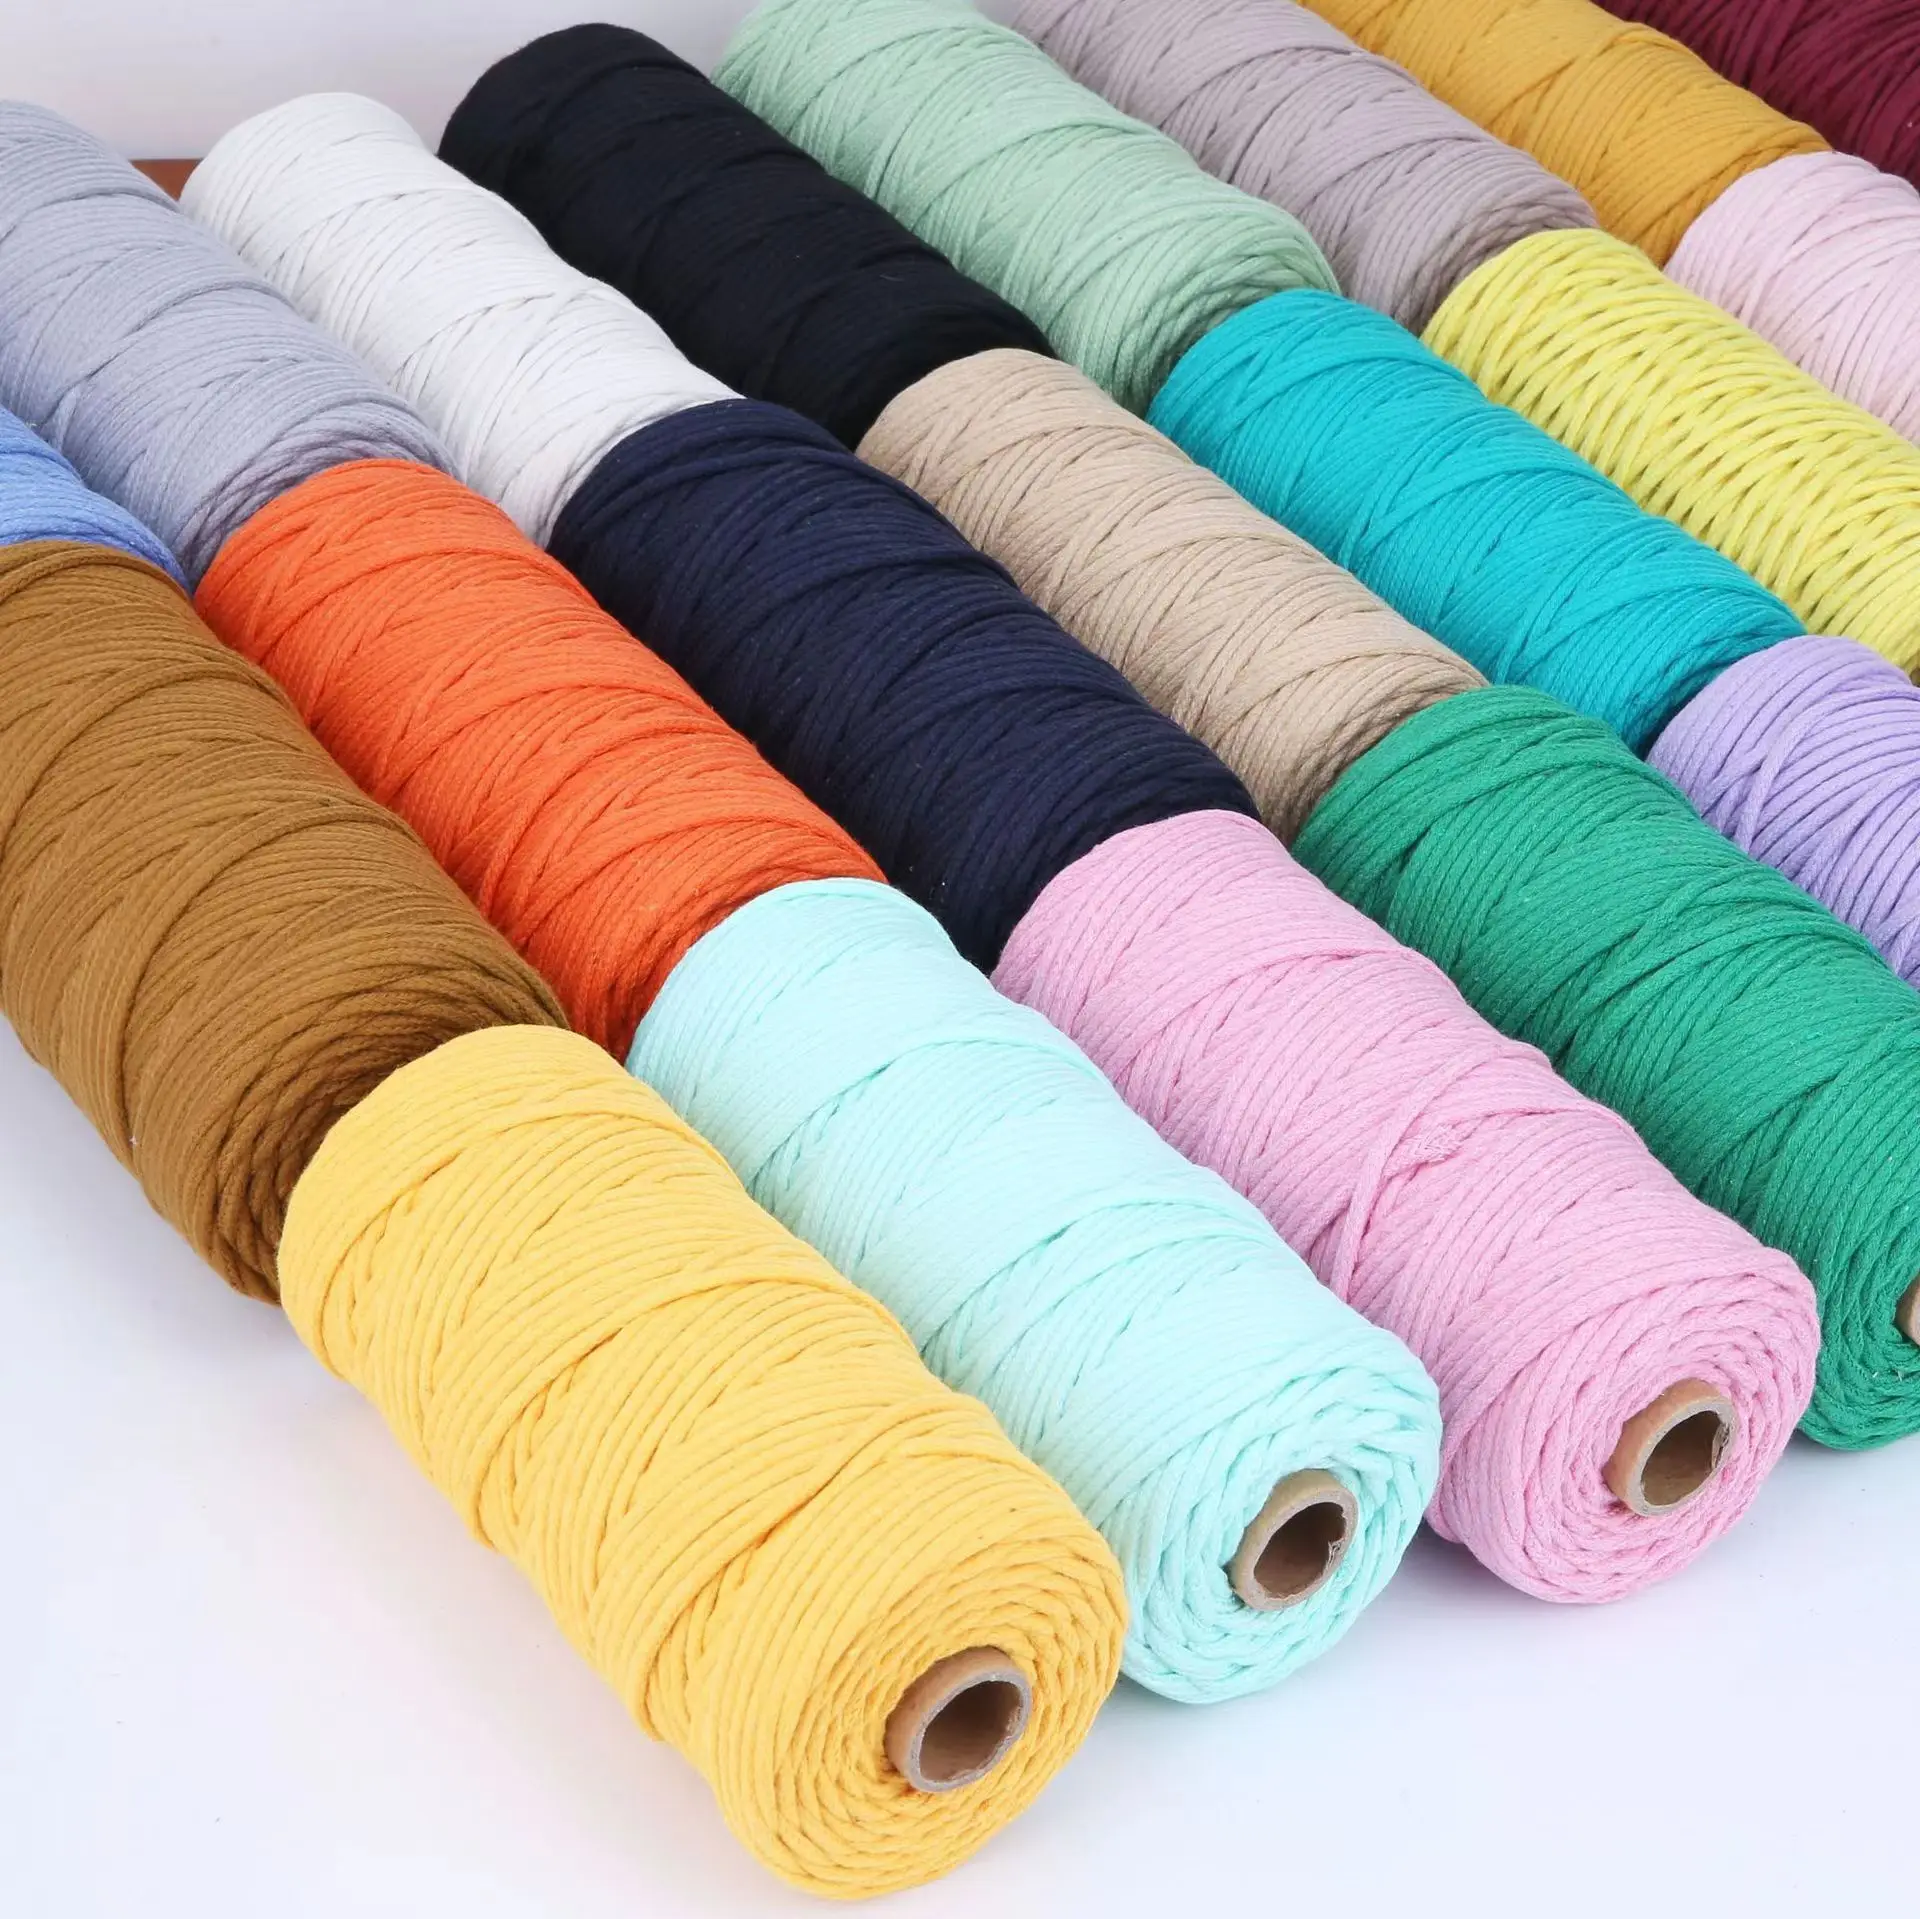 5mm 5Yards Hand Cut Macrame Cord Twine Cotton Rope String Crafts